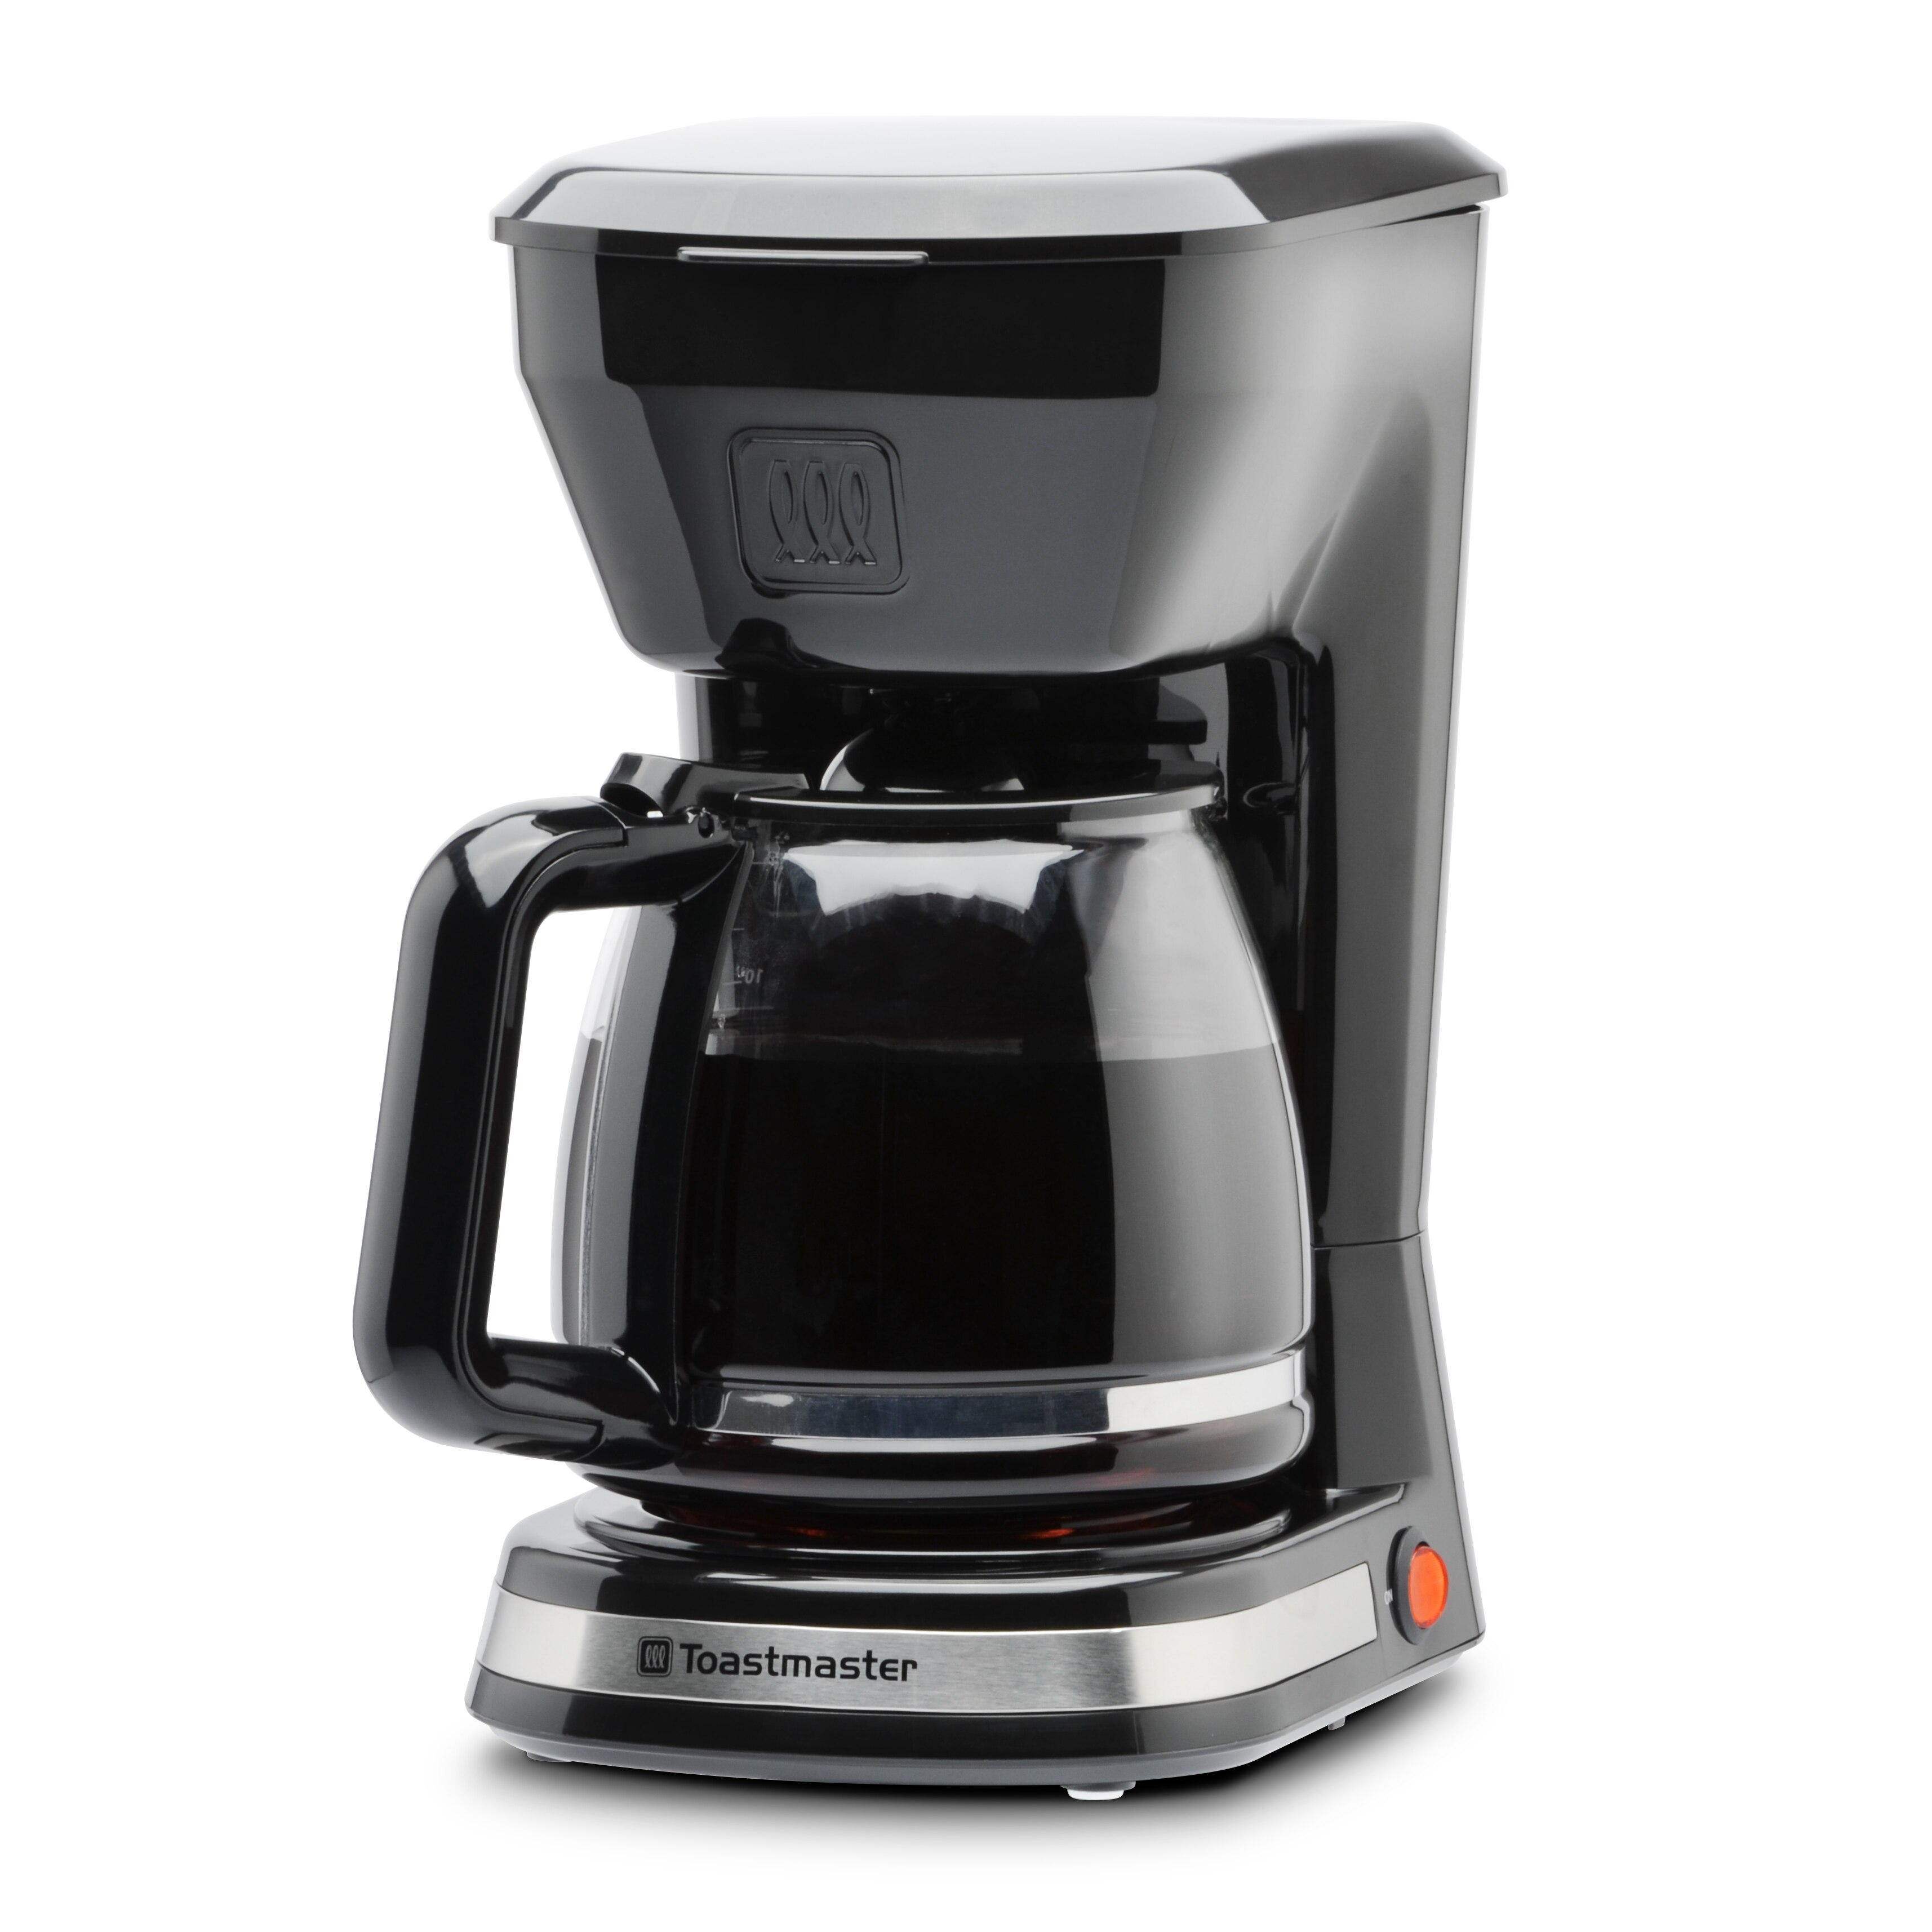 Toastmaster Coffee Maker, 12-Cup